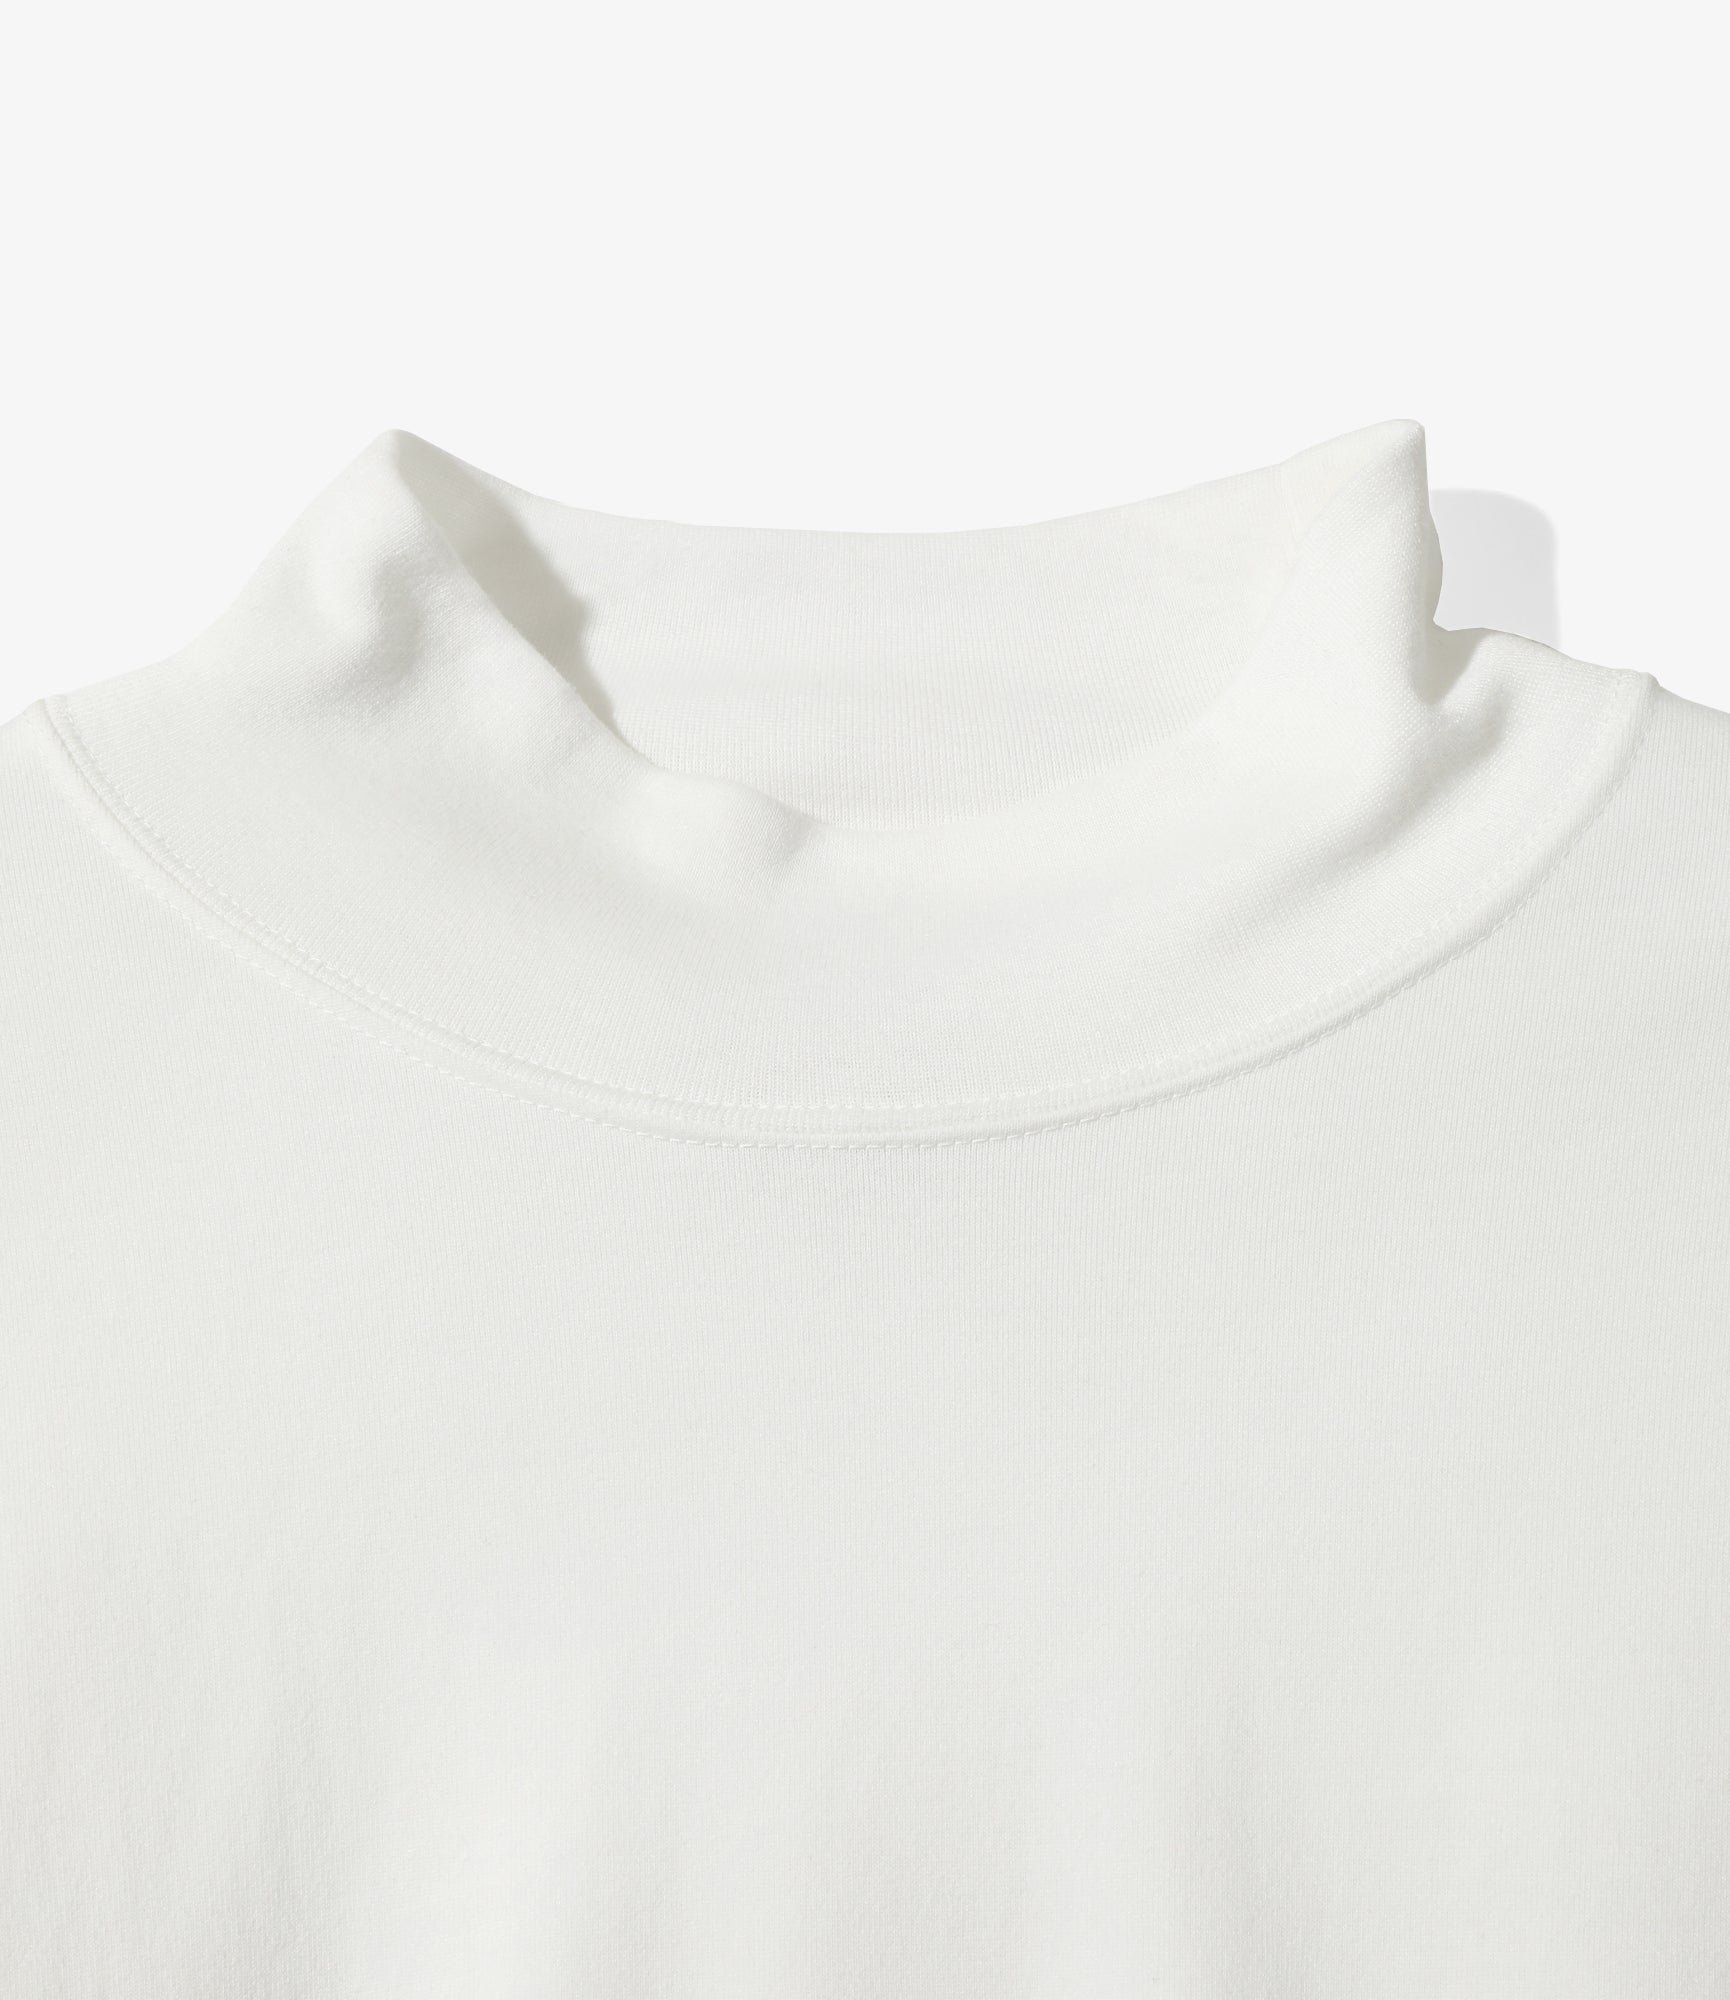 L/S Mock Neck Tee - White - Poly Jersey